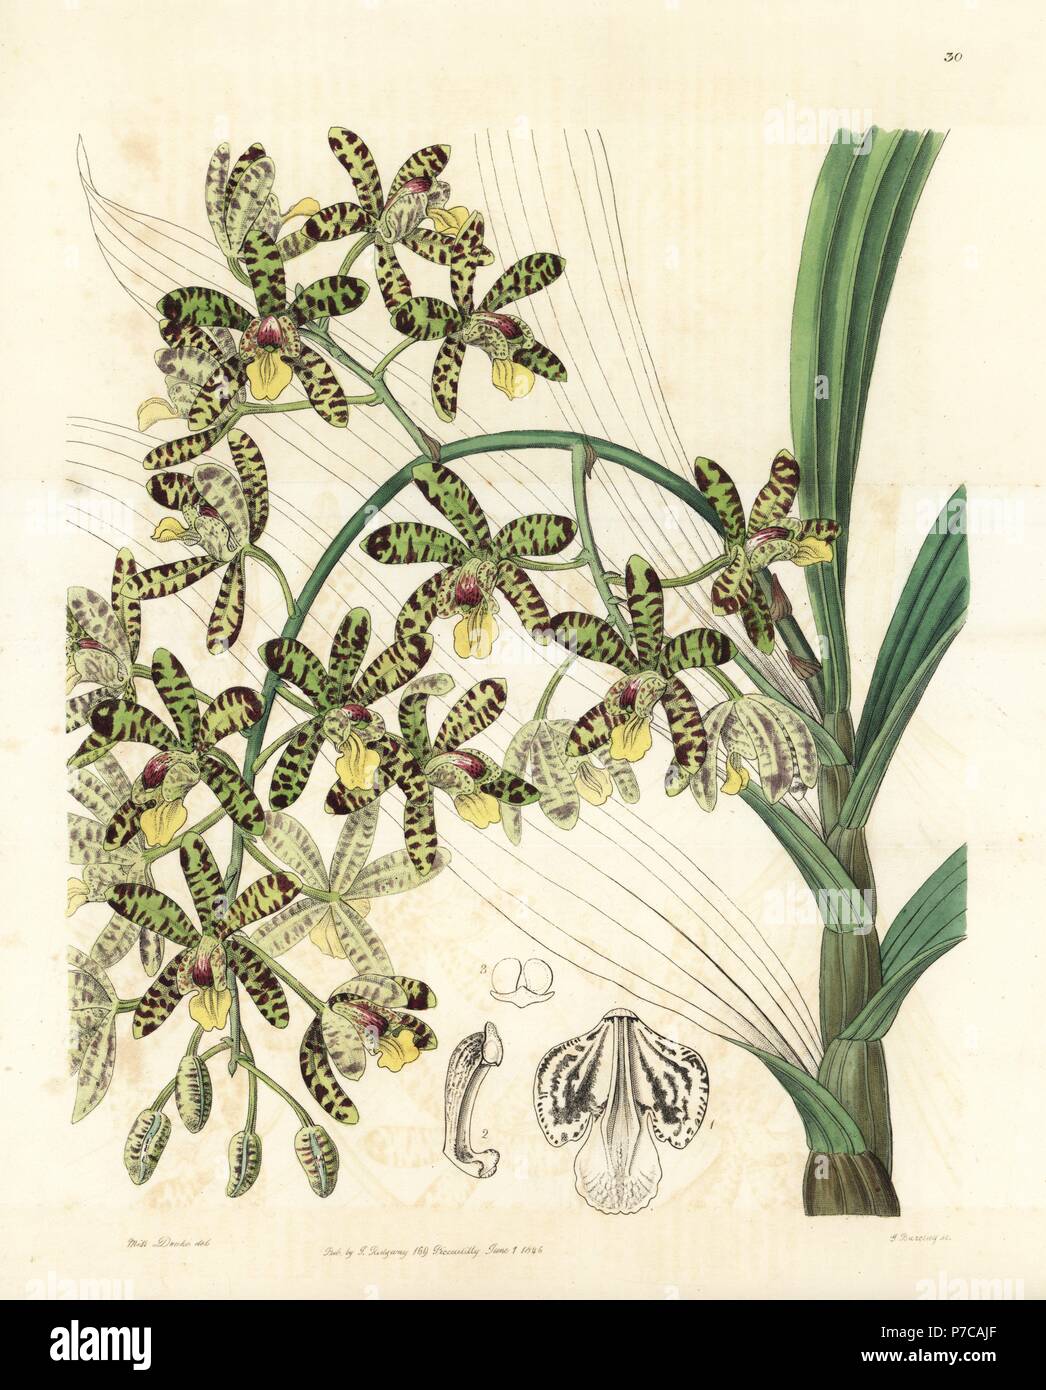 African ansellia or leopard orchid, Ansellia africana. Handcoloured copperplate engraving by George Barclay after an illustration by Miss Sarah Drake from Edwards' Botanical Register, edited by John Lindley, London, Ridgeway, 1846. Stock Photo